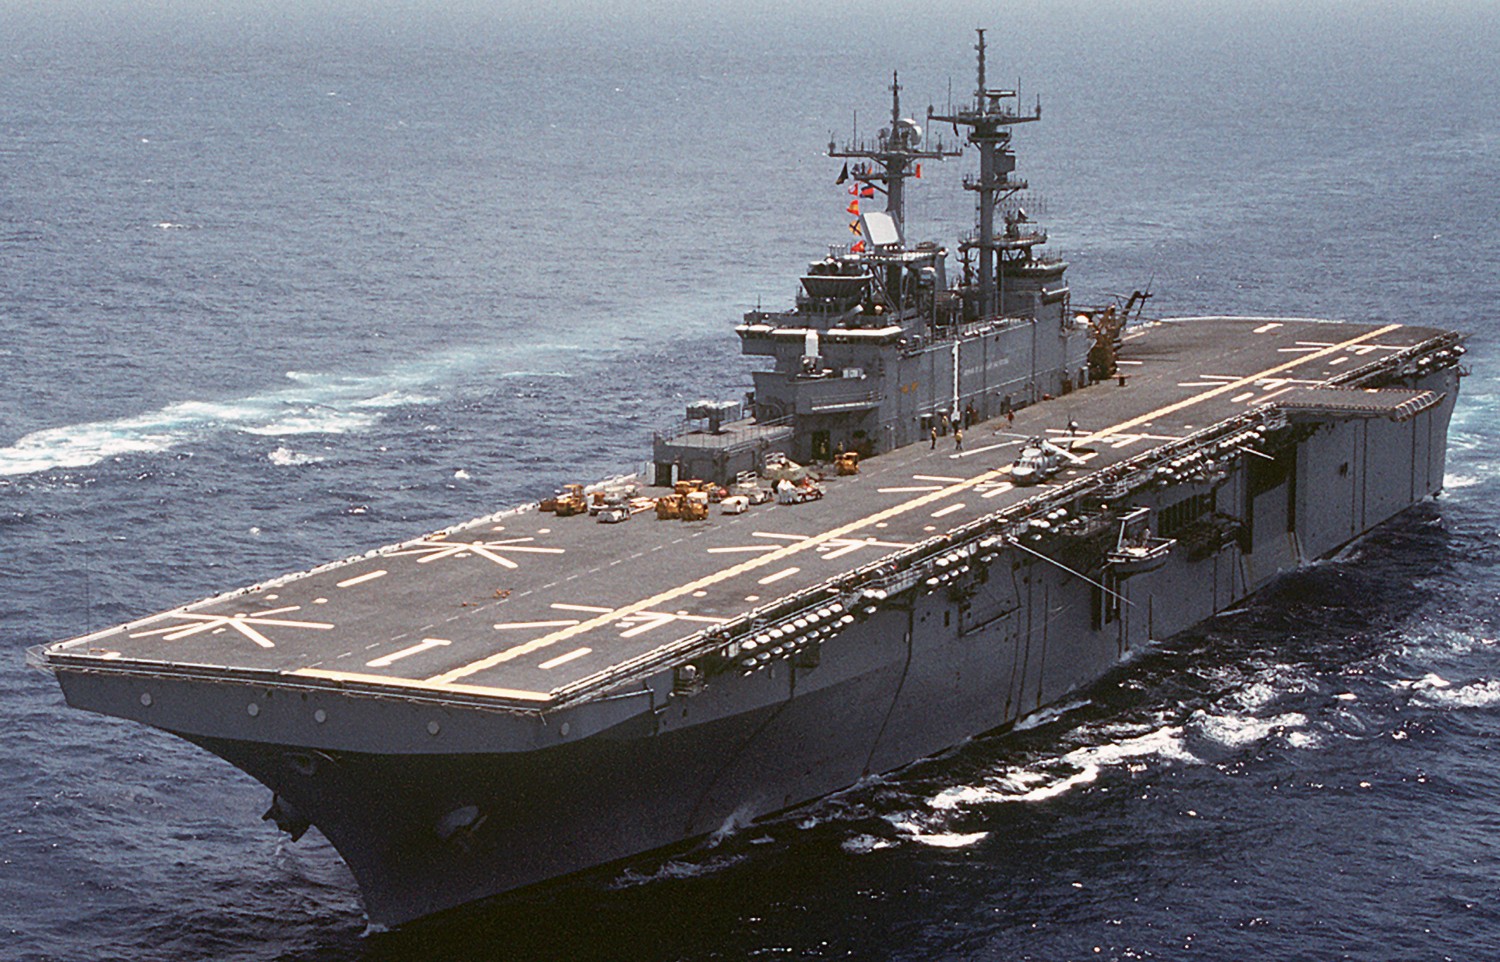 lhd-1 uss wasp amphibious assault landing ship dock helicopter us navy off colombia 84